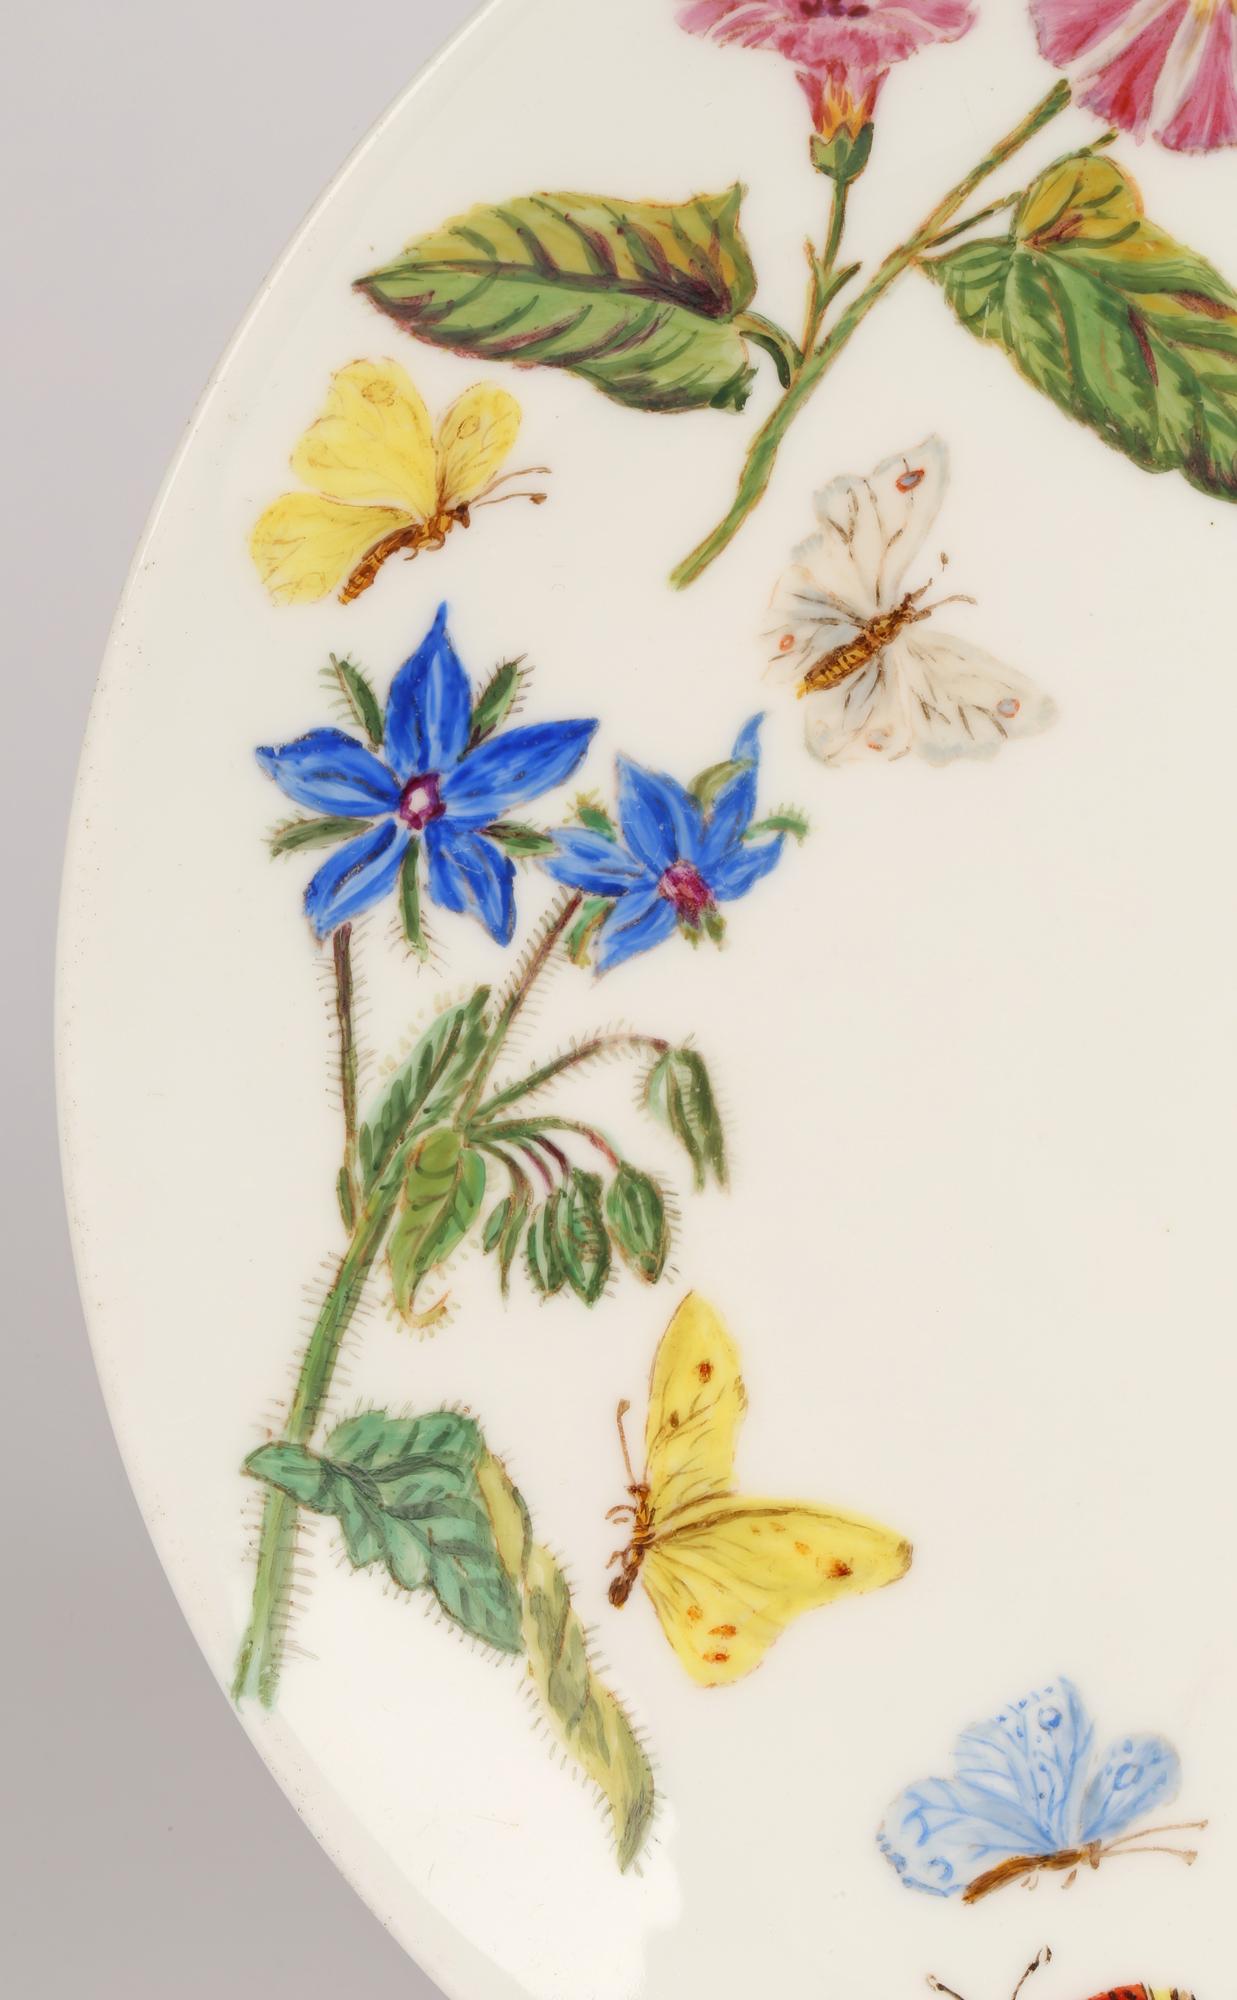 Minton Porcelain Hand-Painted Blank Cabinet Plate Signed AMB, 1890 For Sale 2